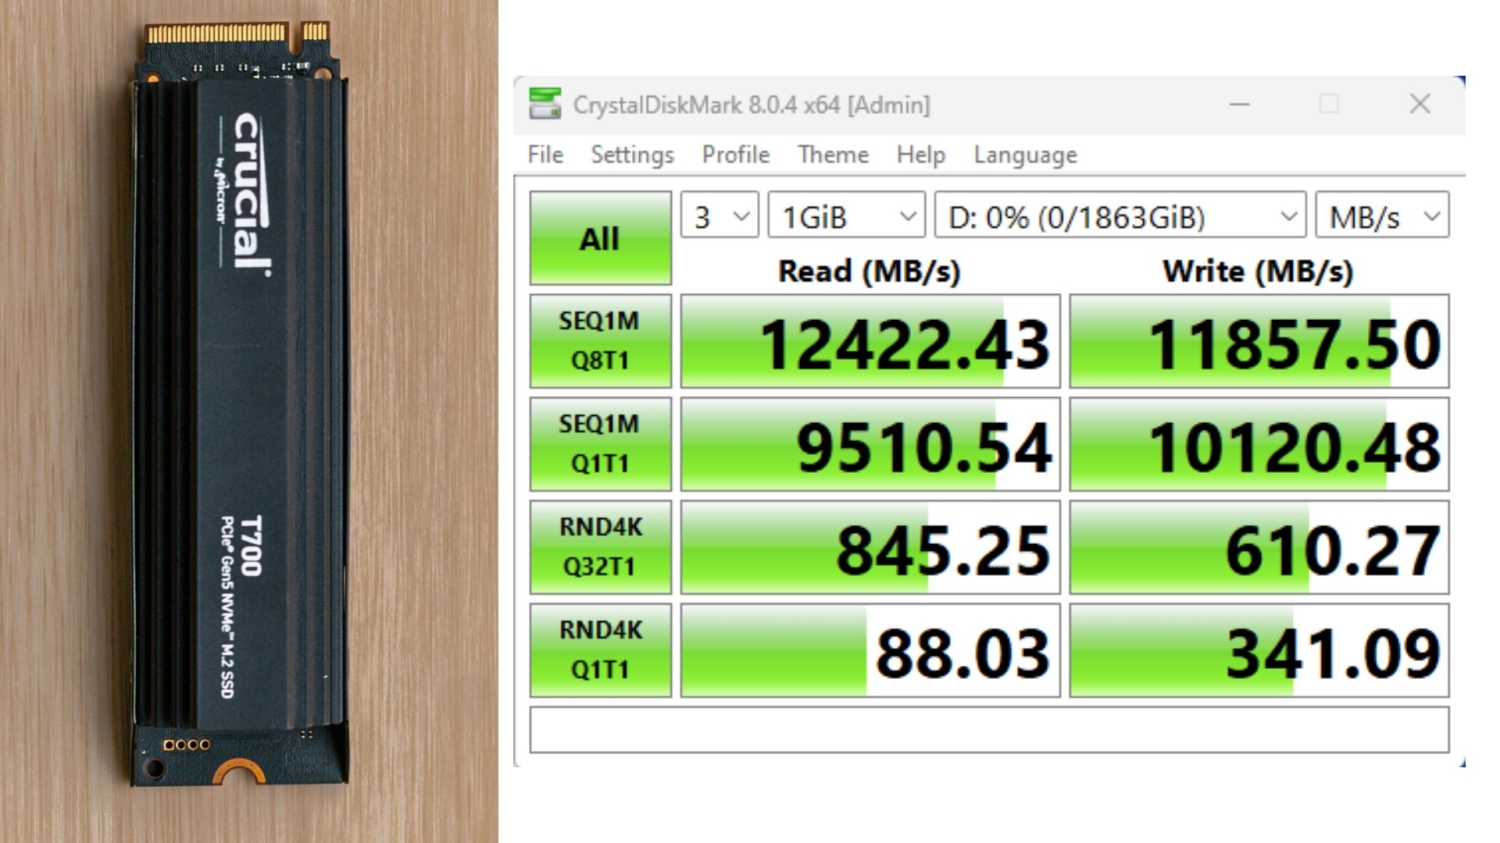 Crucial T700 PCIe Gen5 SSDs Now Avaialble For Pre-Order: Blazing Fast 12.4  GB/s Speeds, 1 TB $179, 2 TB $339, 4 TB $599